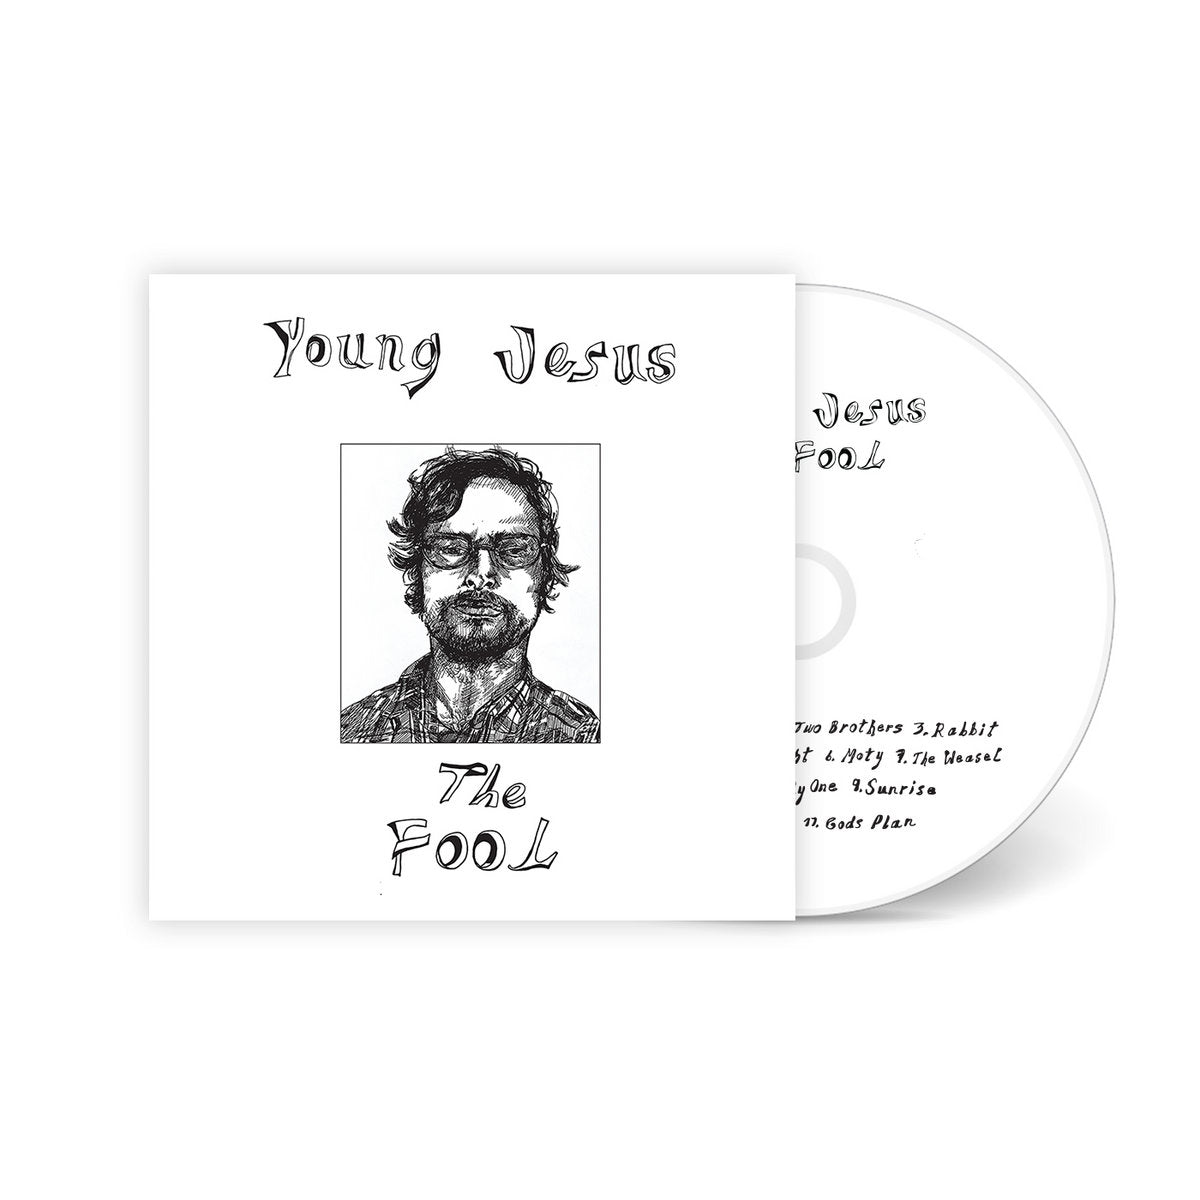 Young Jesus - The Fool: CD